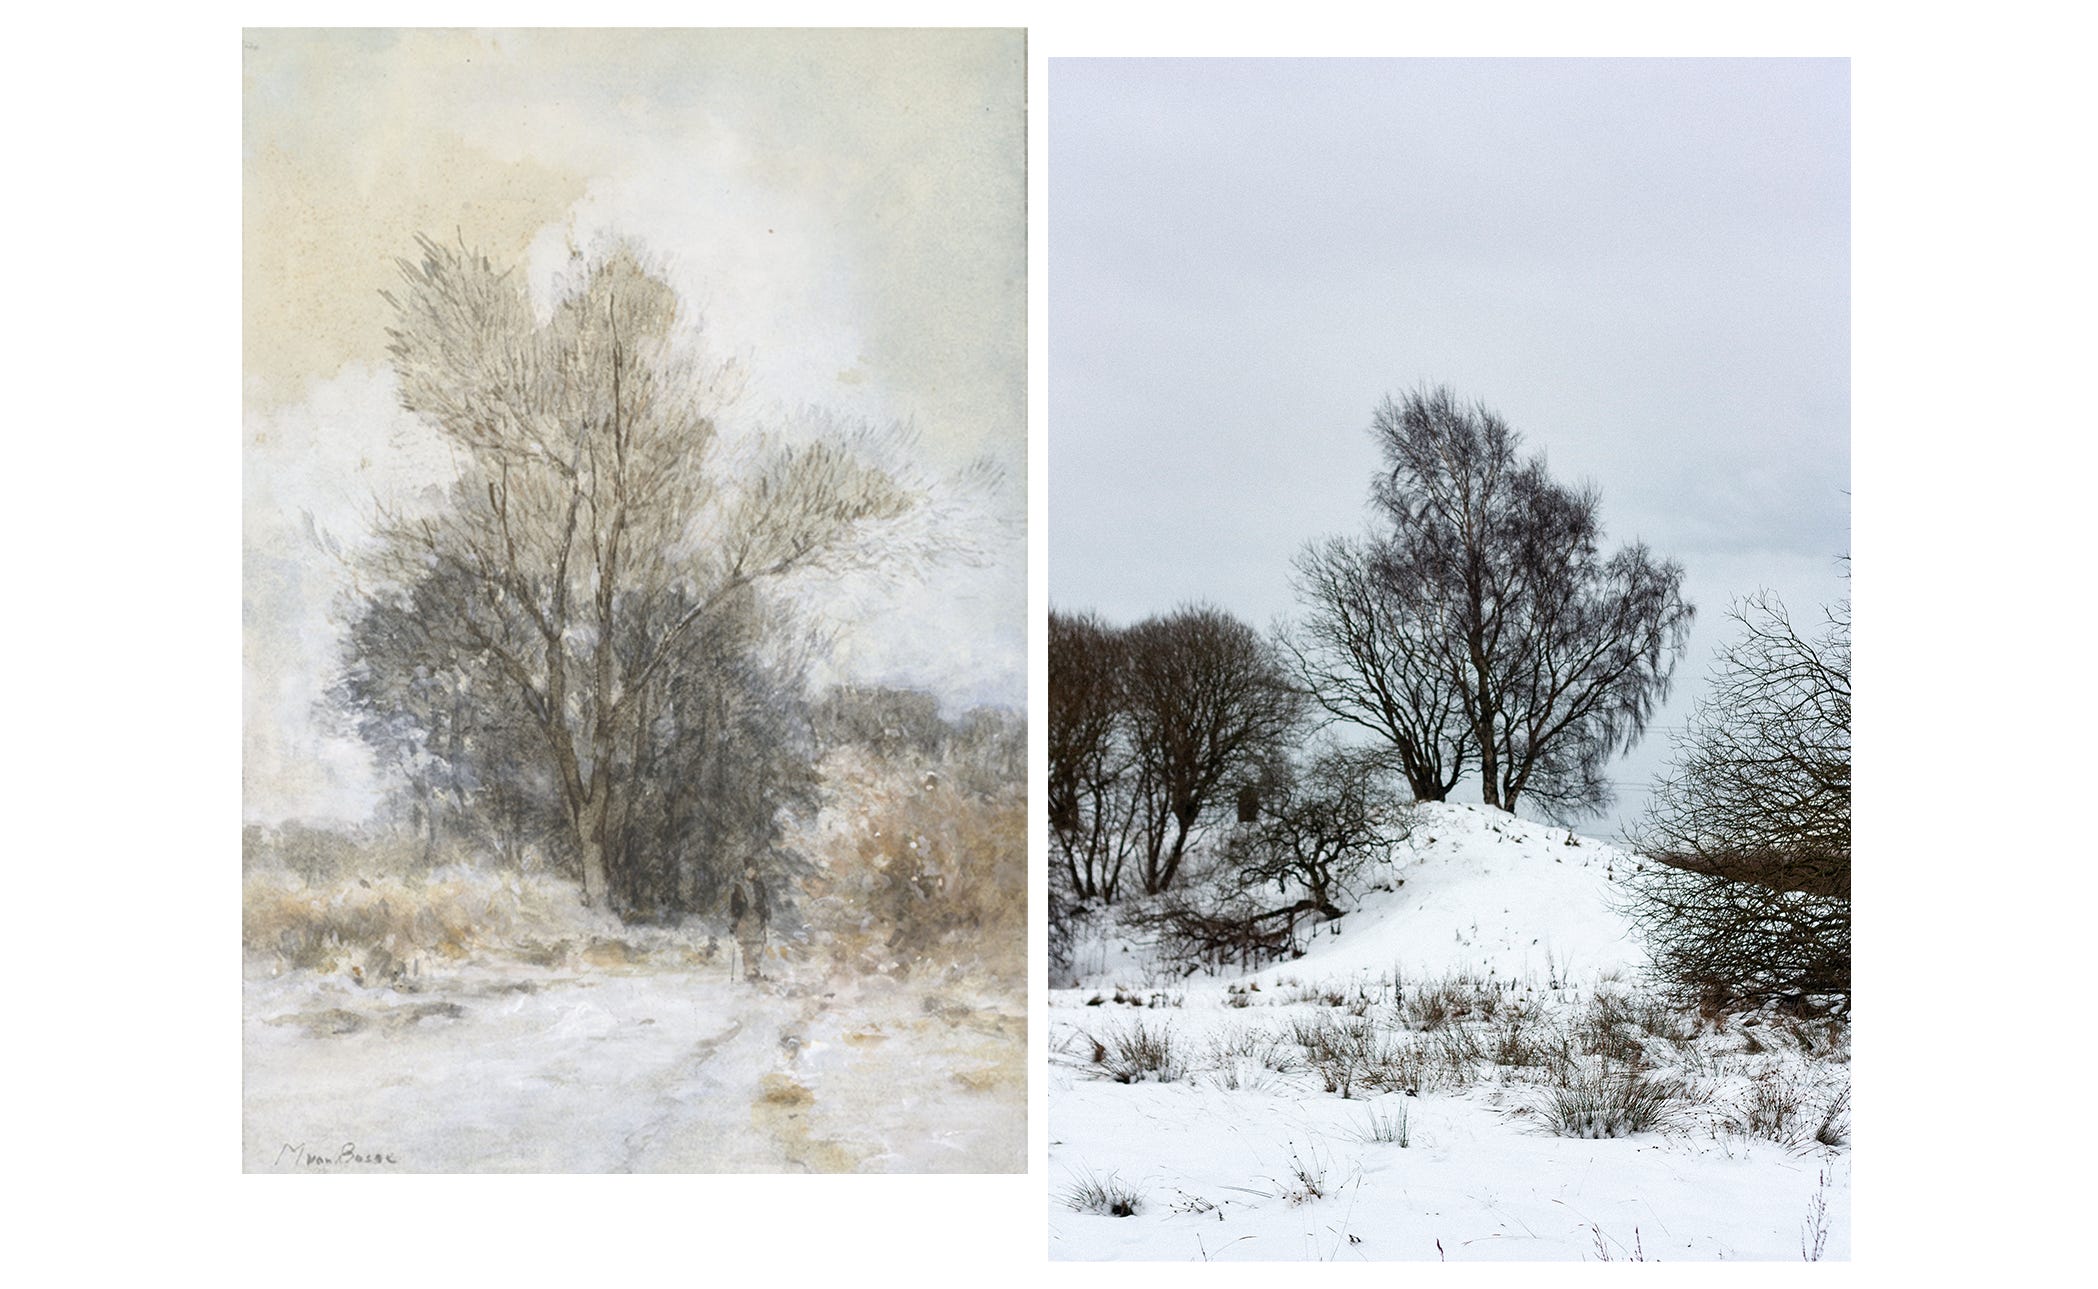 Right image is a watercolour of a snowy woodland path, large trees in the background and the outline of a single person walking in the distance. Left image is a photograph of a small snowy hill with a large tree growing up behind it. The two trees in each image look very similar. 